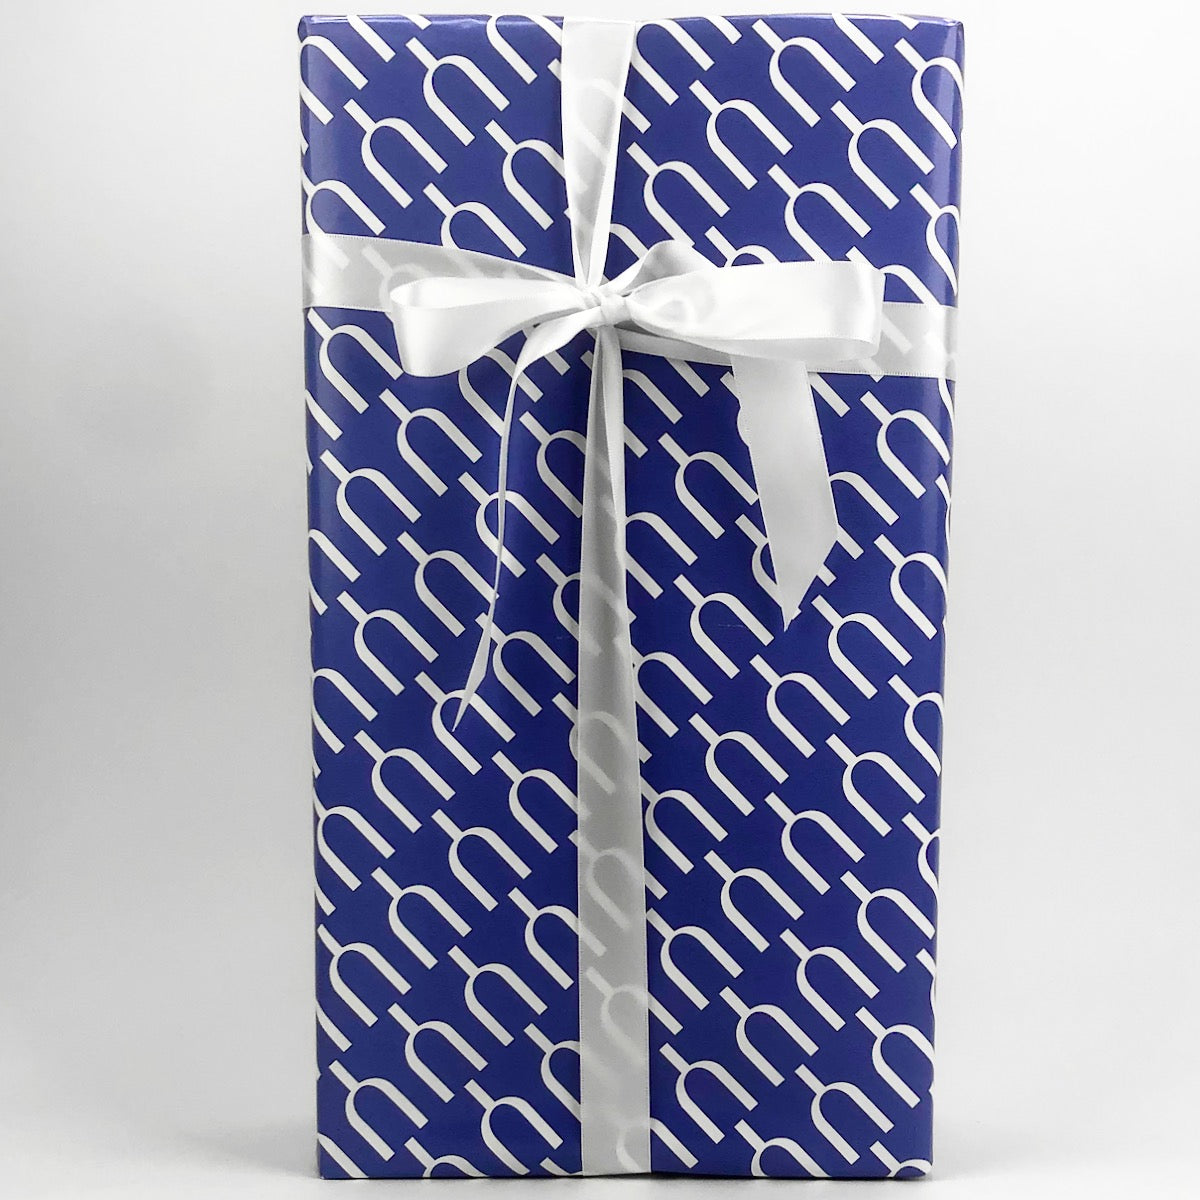 - Gift Wrapping for 2 bottles -